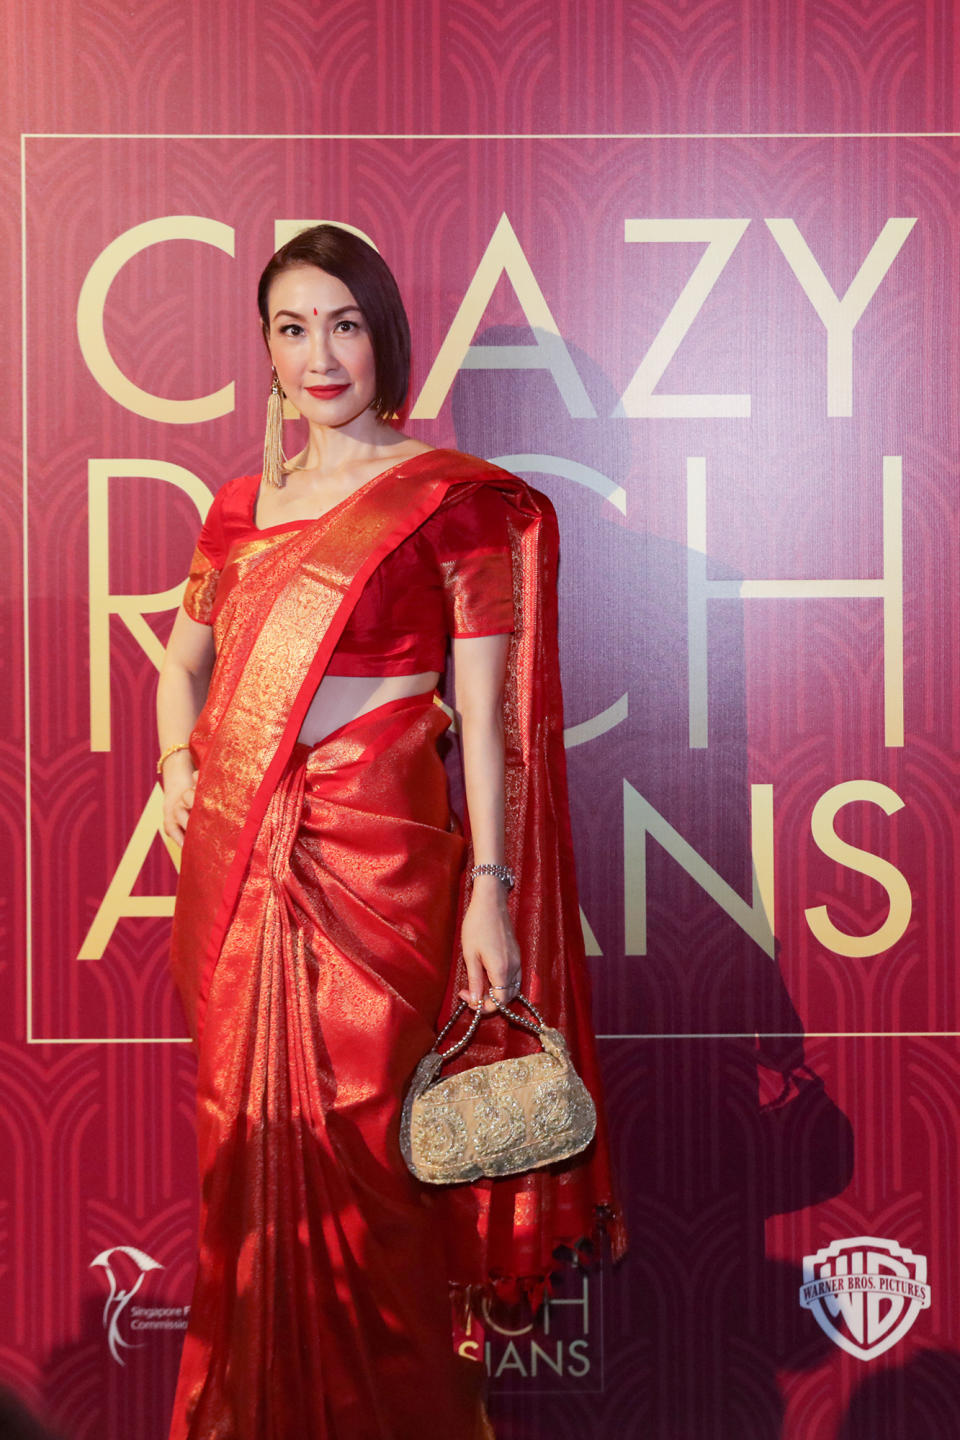 <p>Singaporean actress Amy Cheng poses for photographers at the Singapore premiere of ‘Crazy Rich Asians’ on 21 August 2018. (PHOTO: Yahoo Lifestyle Singapore) </p>